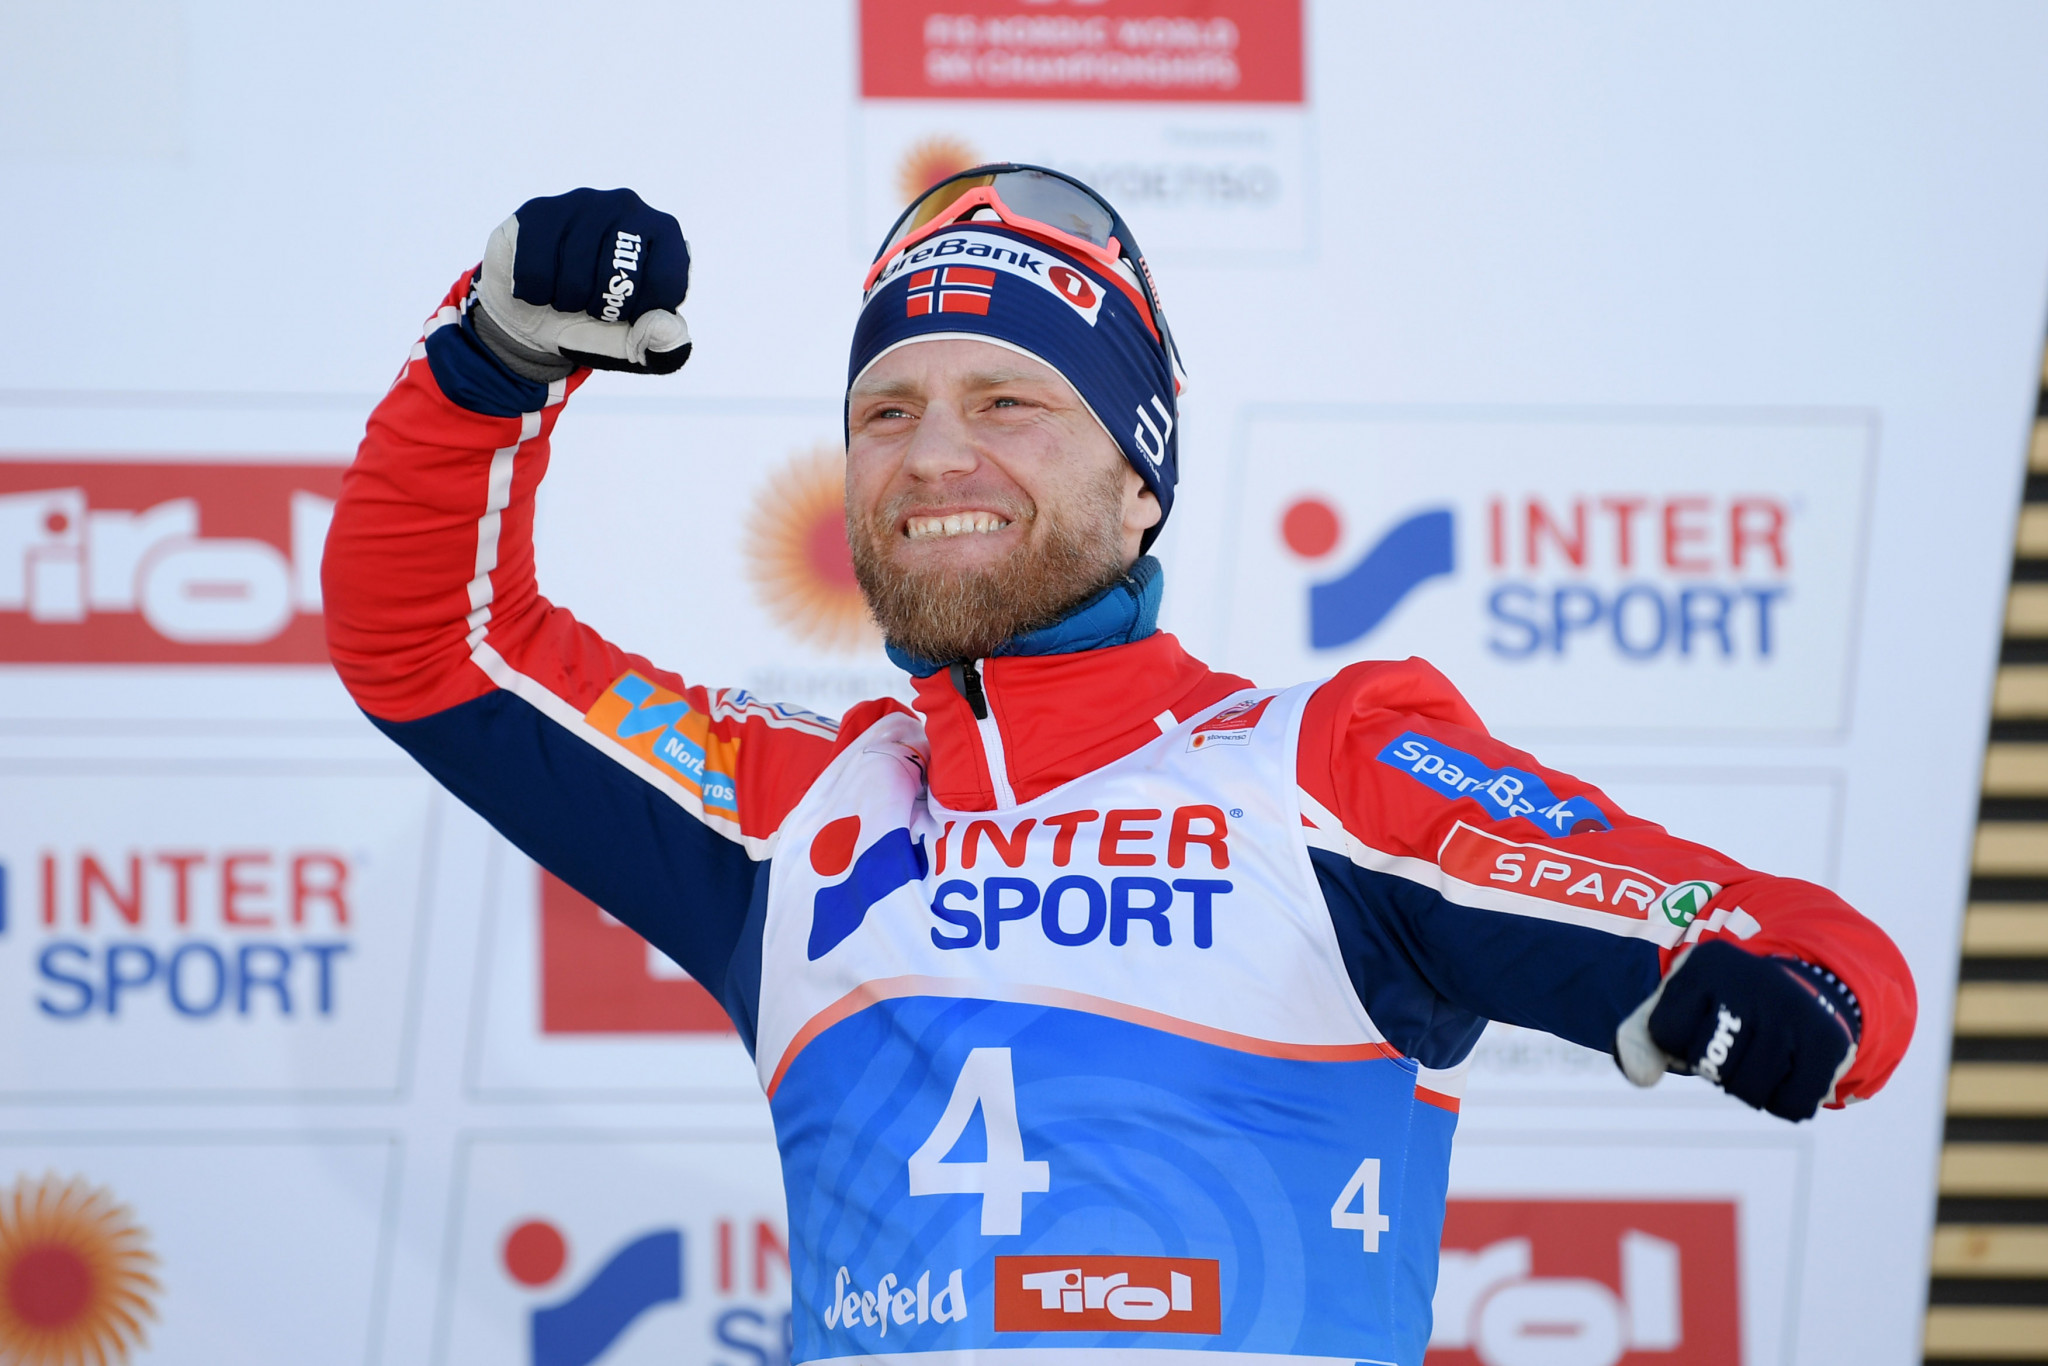 Sundby win's men's 15km cross-country final as Austrian police smash "international doping network" at World Nordic Skiing Championships